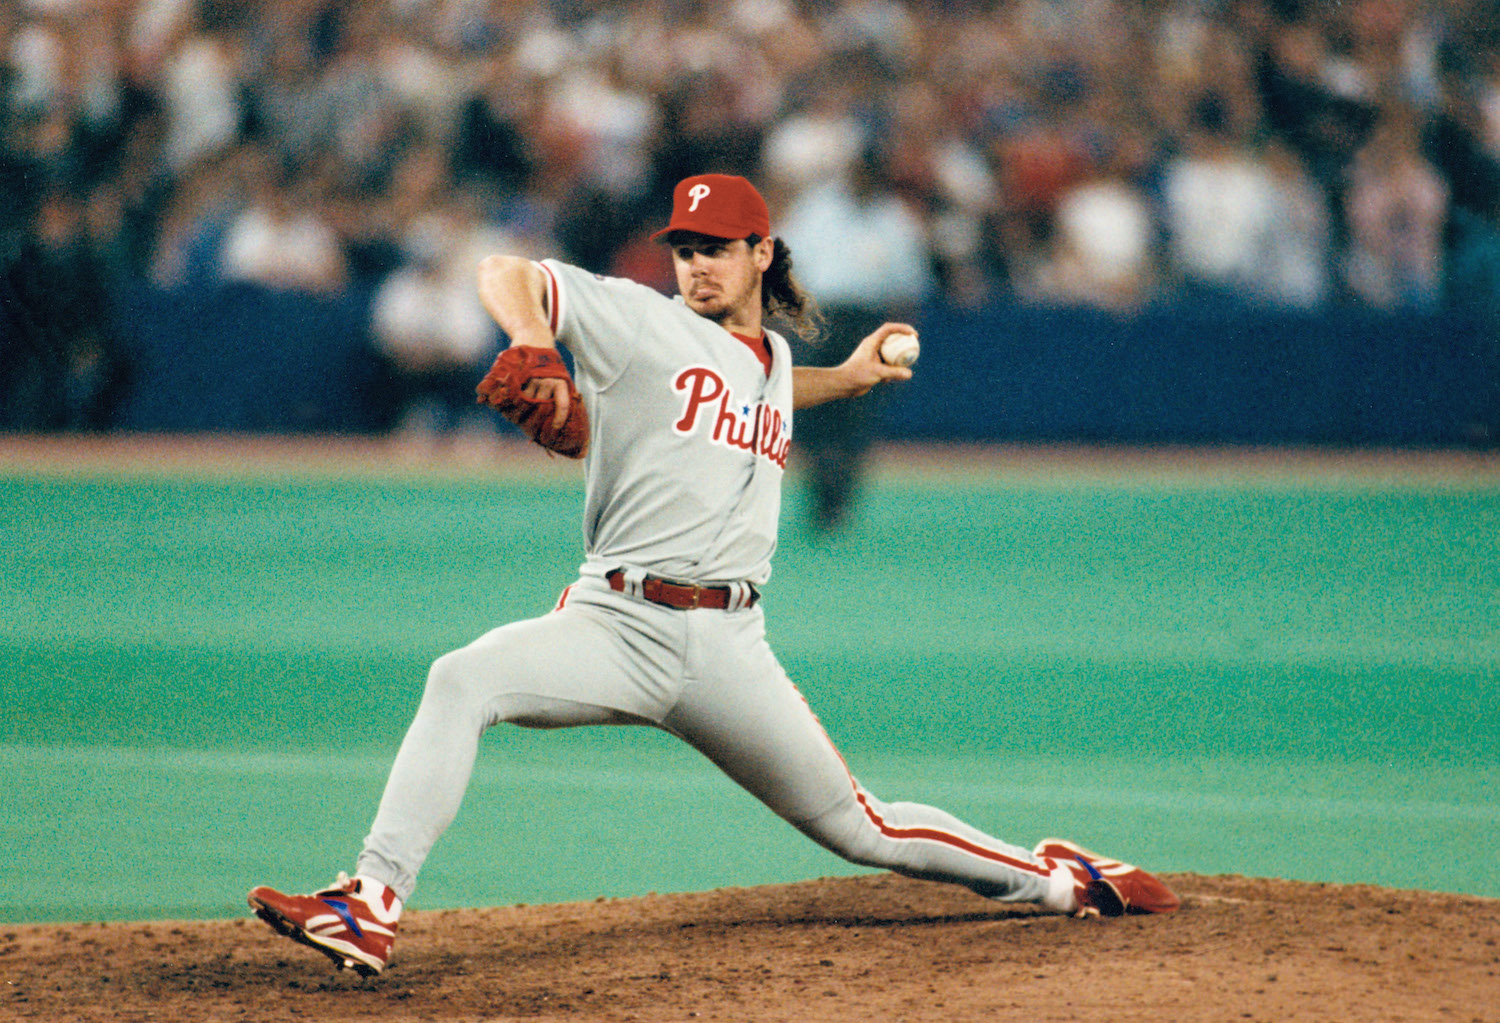 TIL During the 1993 season, pitcher Mitch Williams plunked John